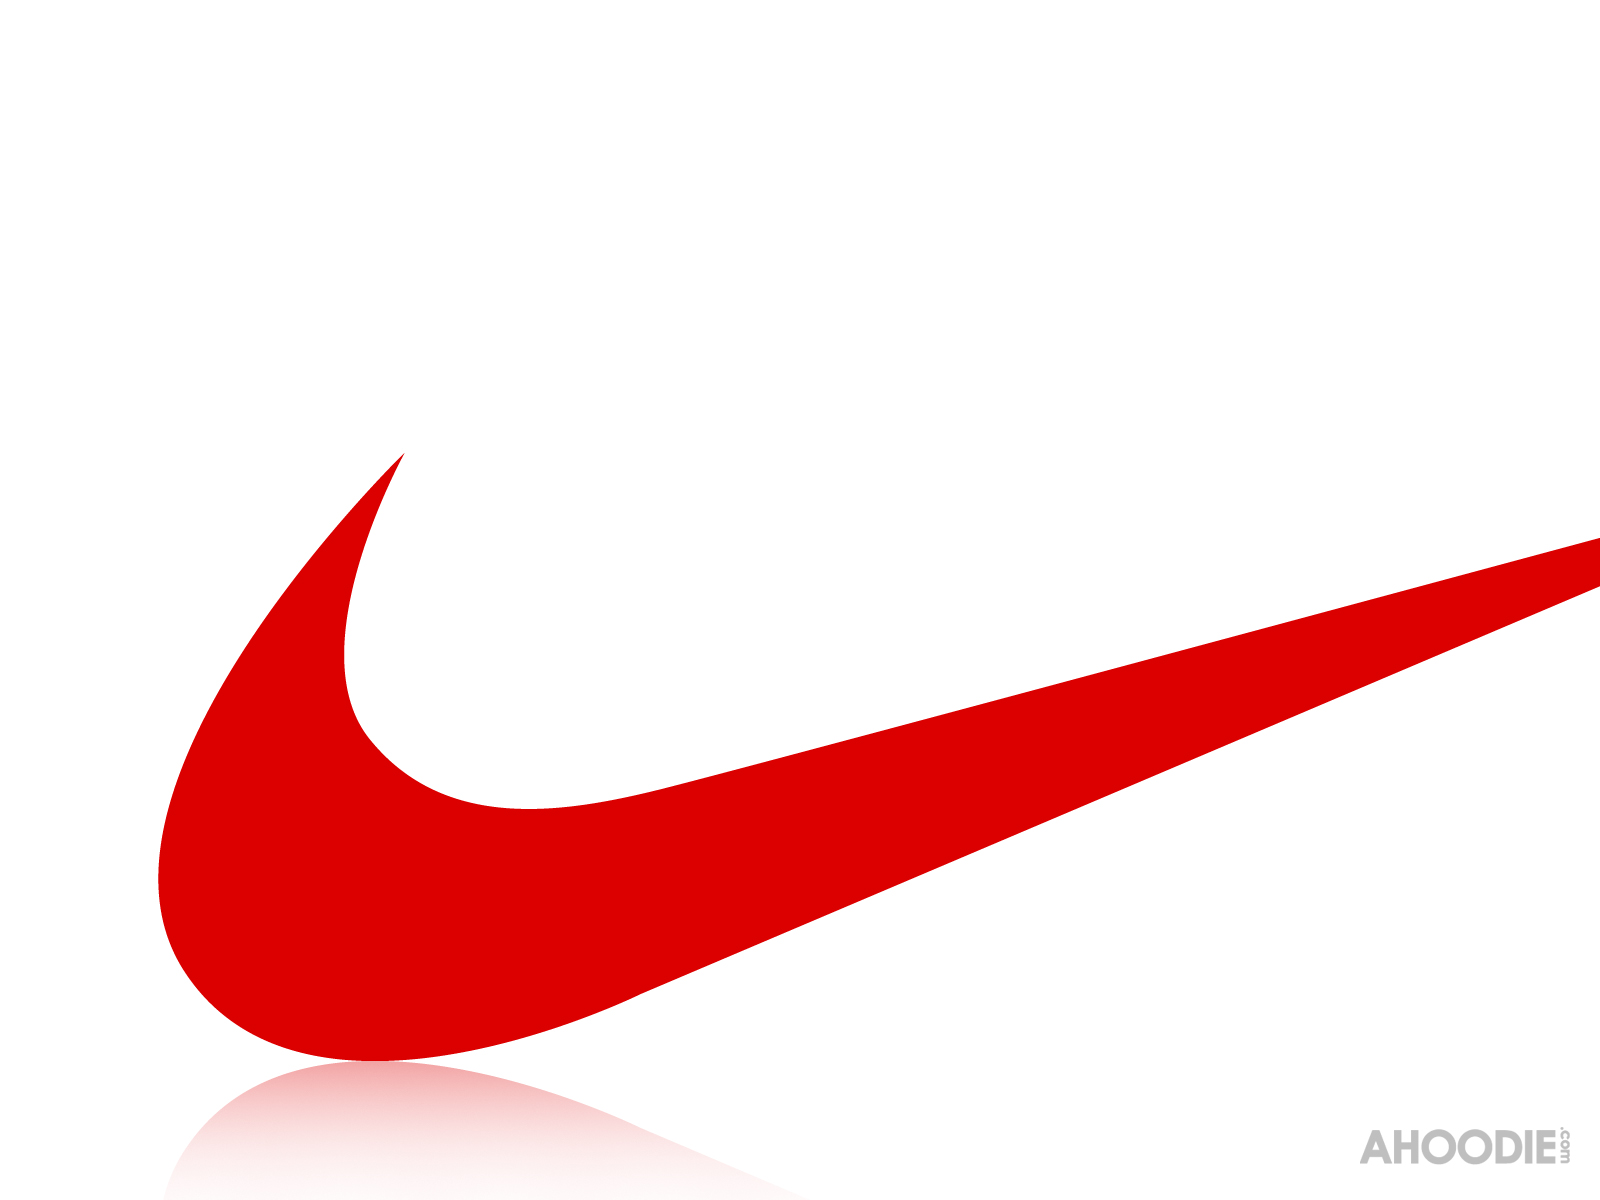 Nike Logo The Swoosh Can Be Merely Described As Simple Fluid And